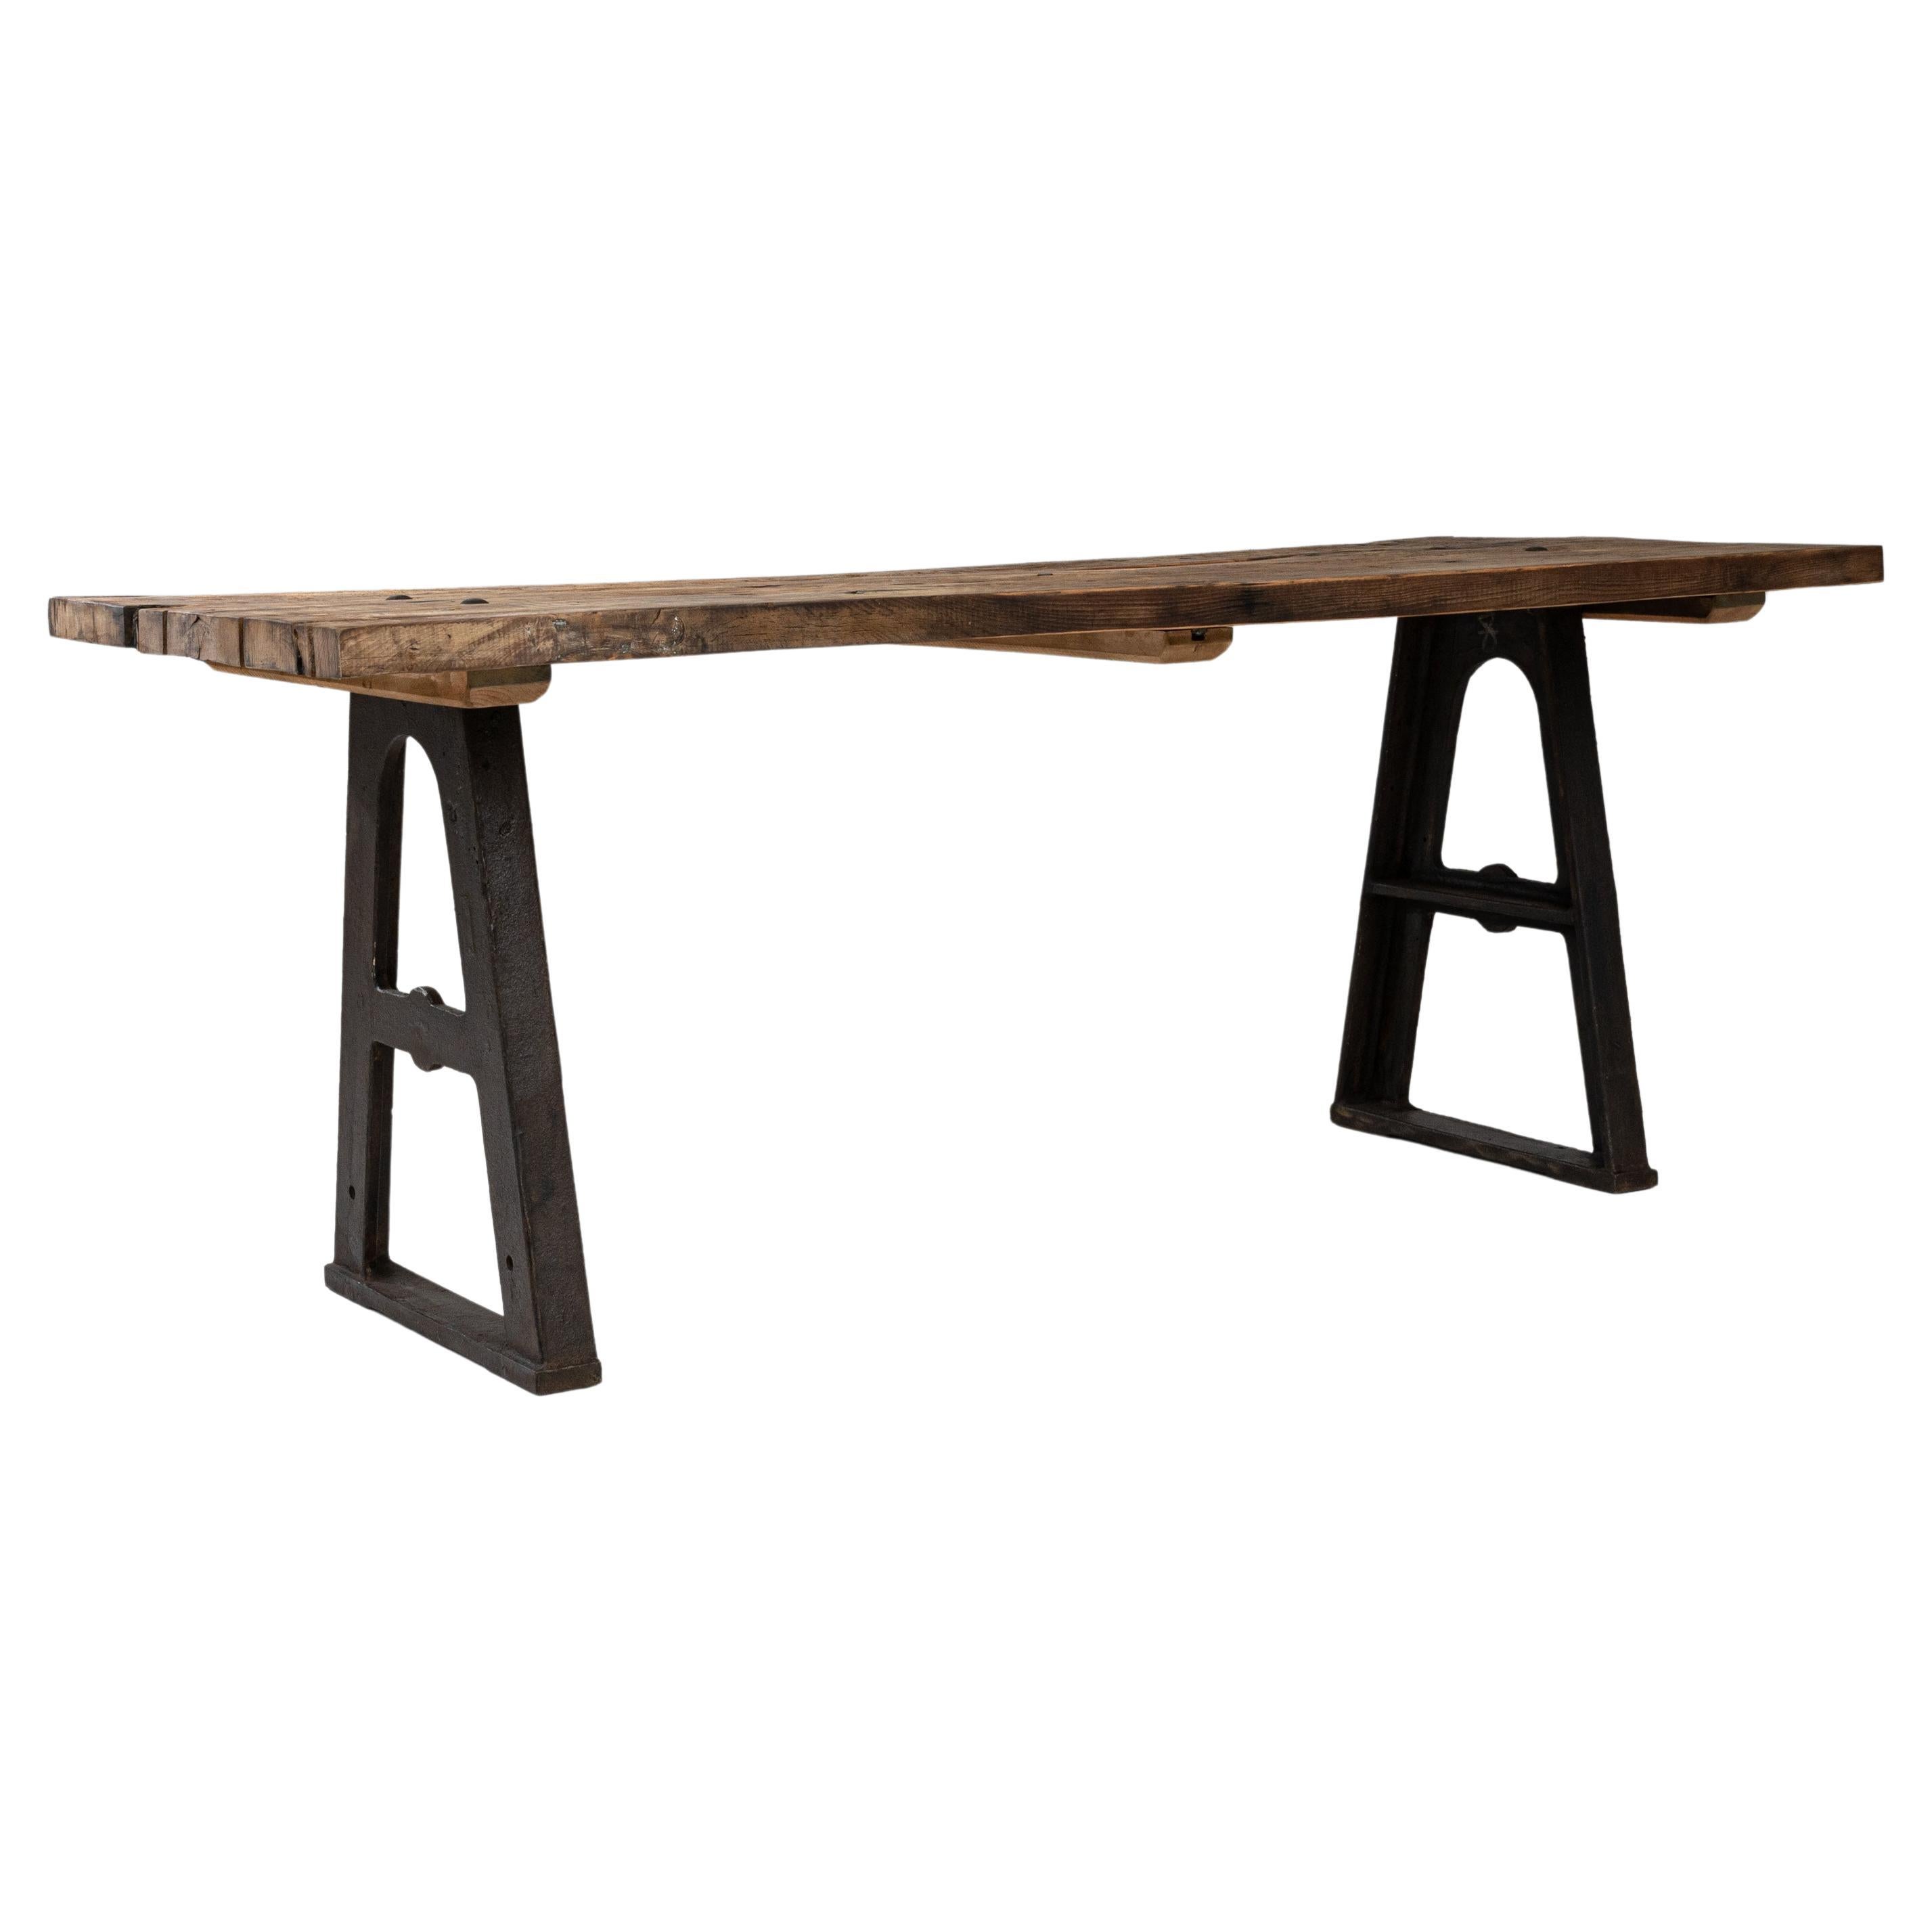 Early 20th Century French Industrial Table For Sale